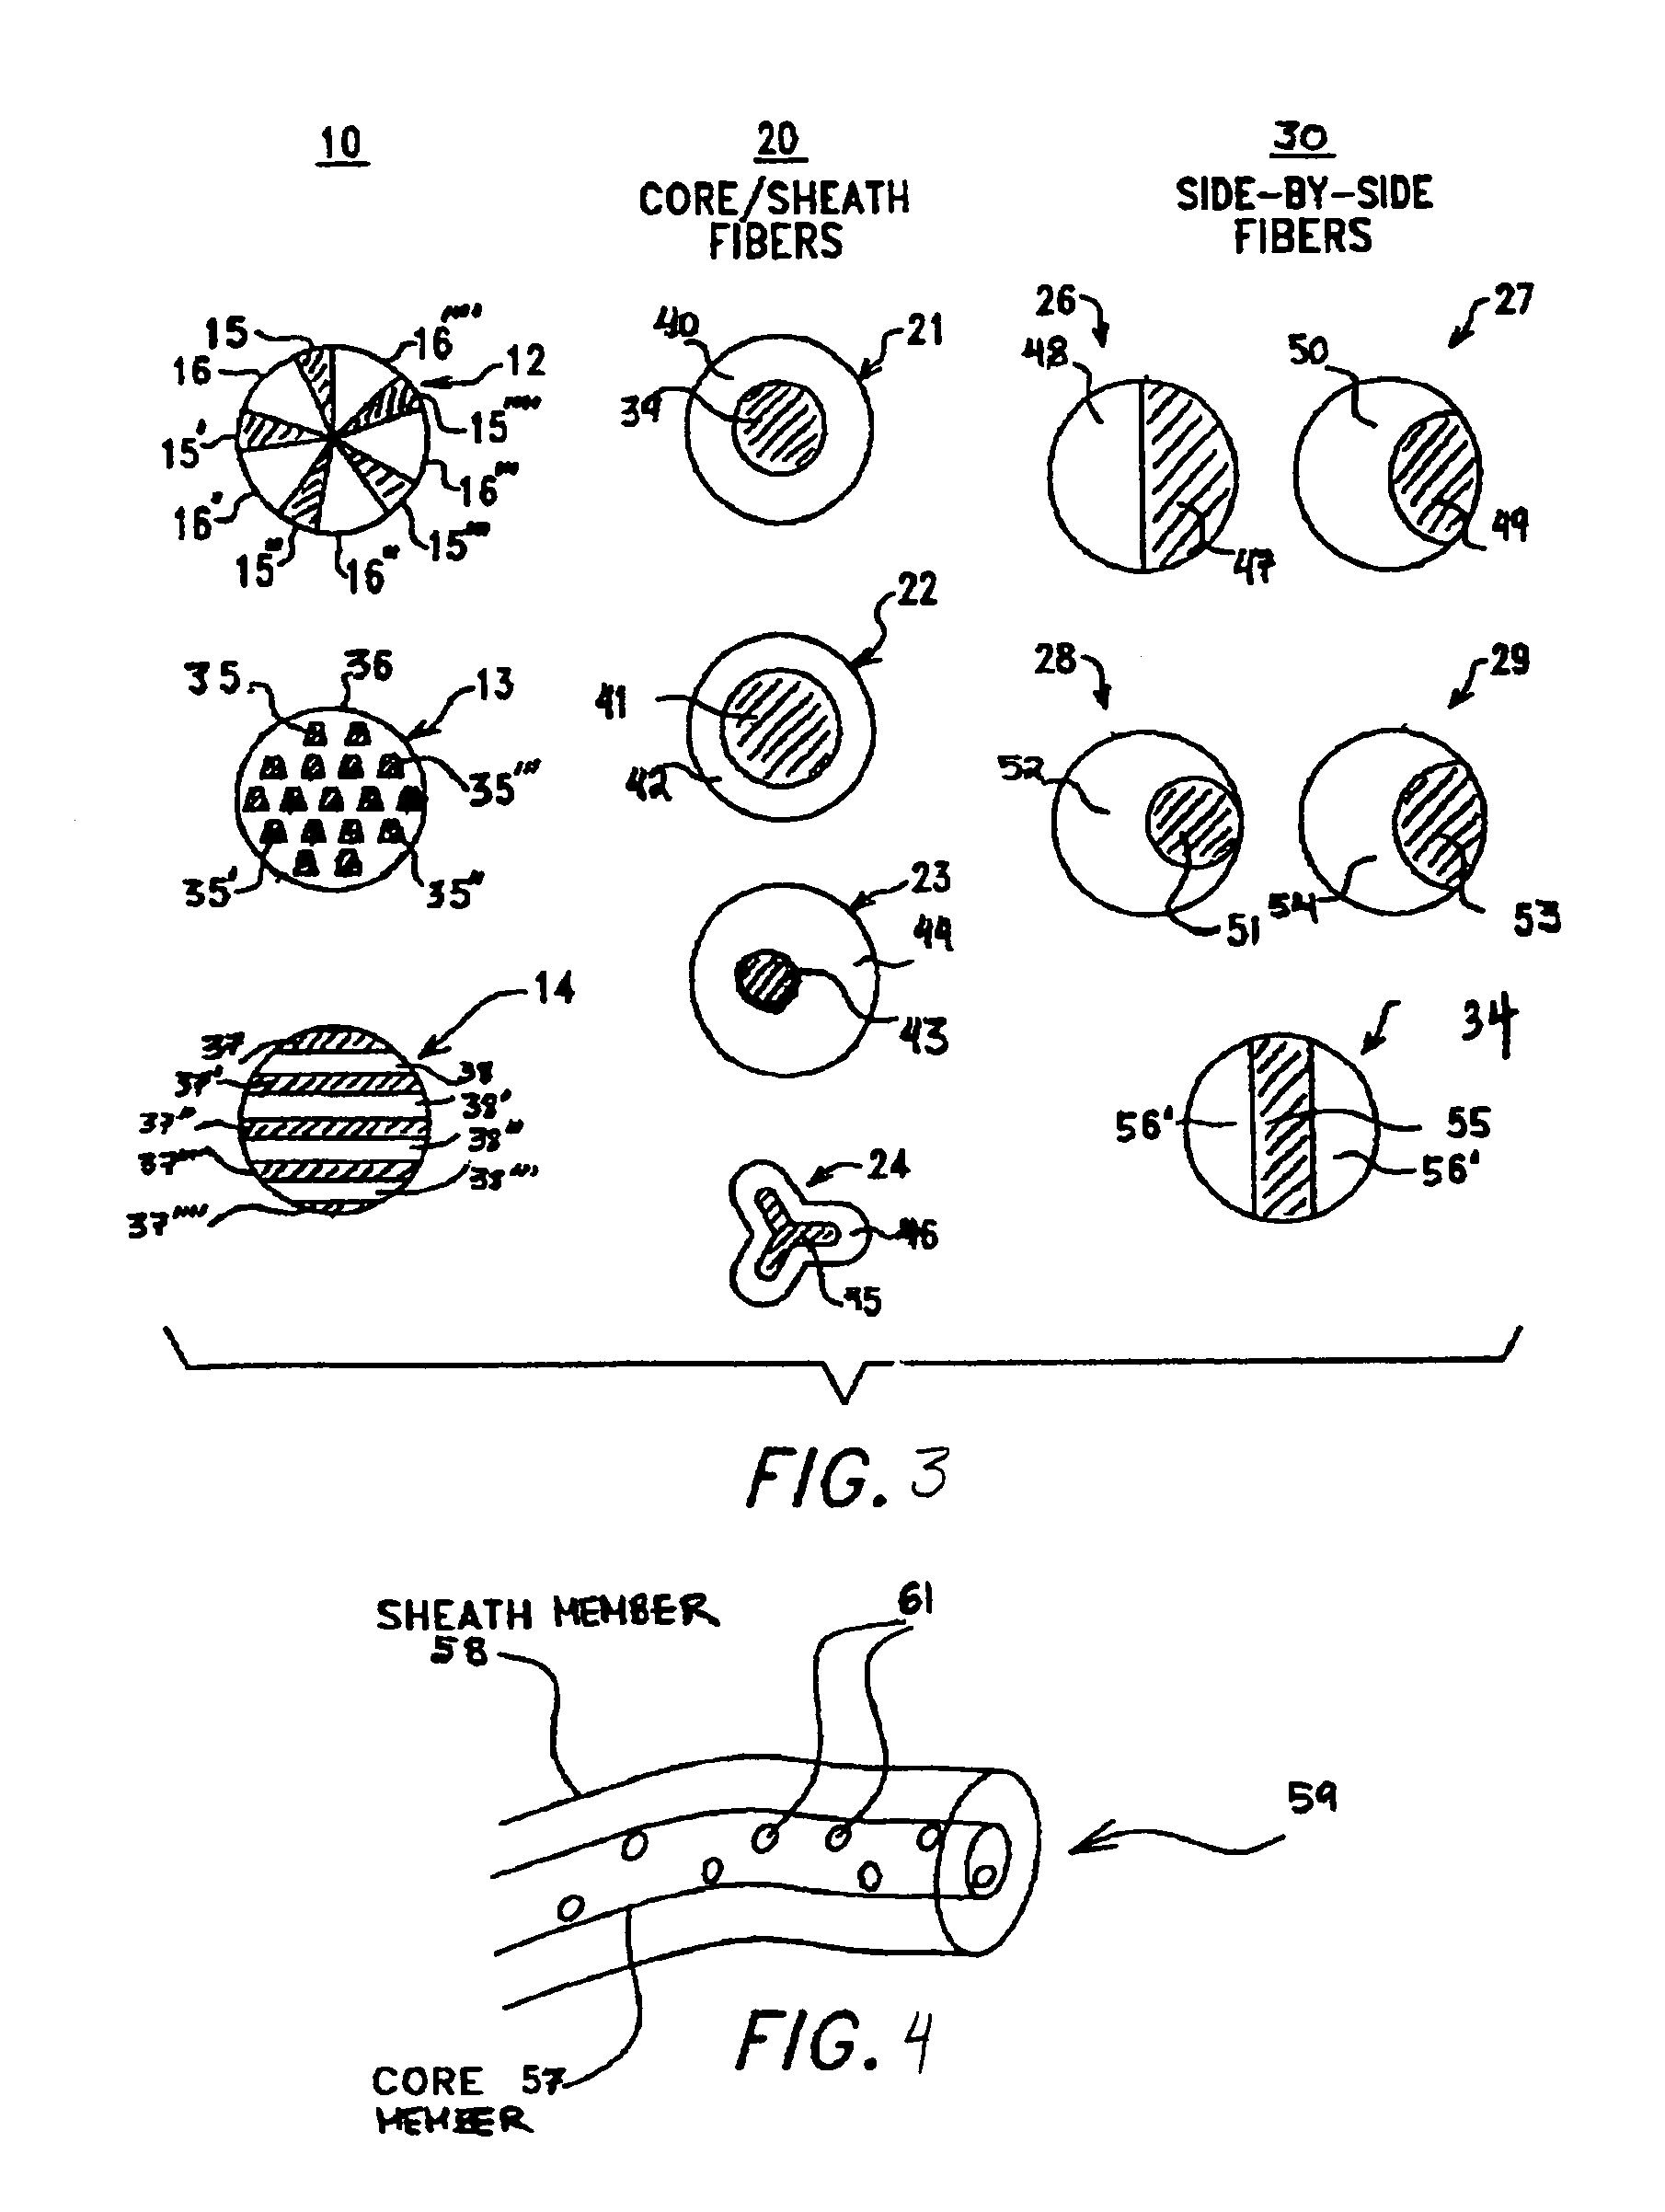 Cellulosic fibers having enhanced reversible thermal properties and methods of forming thereof